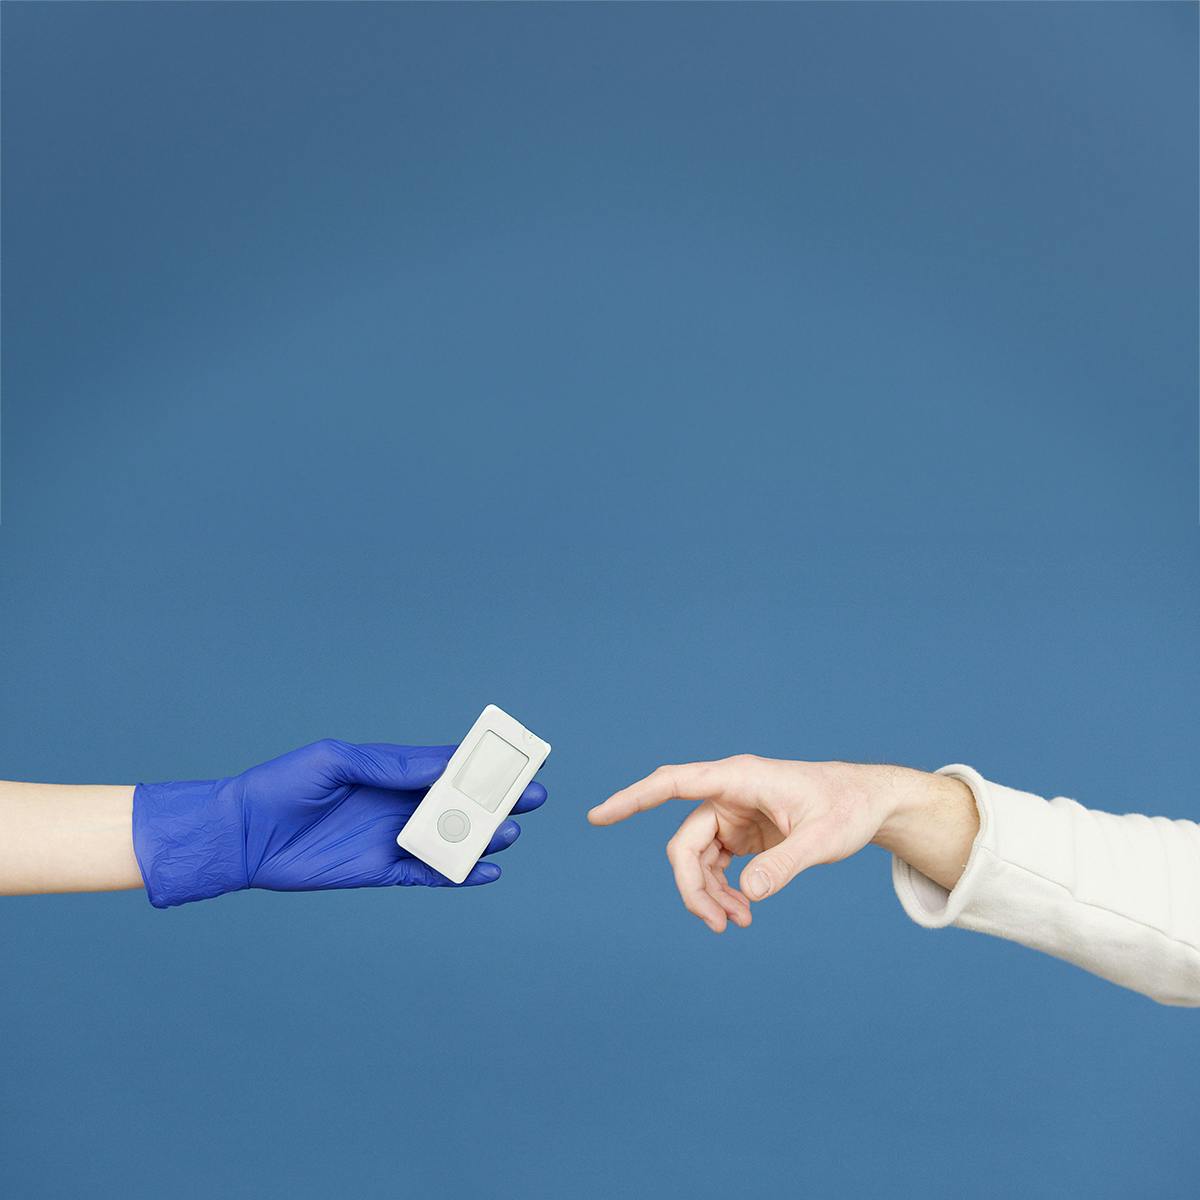 Photo of a gloved hand holding a blood sugar monitoring device reaching out toward the hand of a patient in the style of Michelangelo's "Creation of Adam."